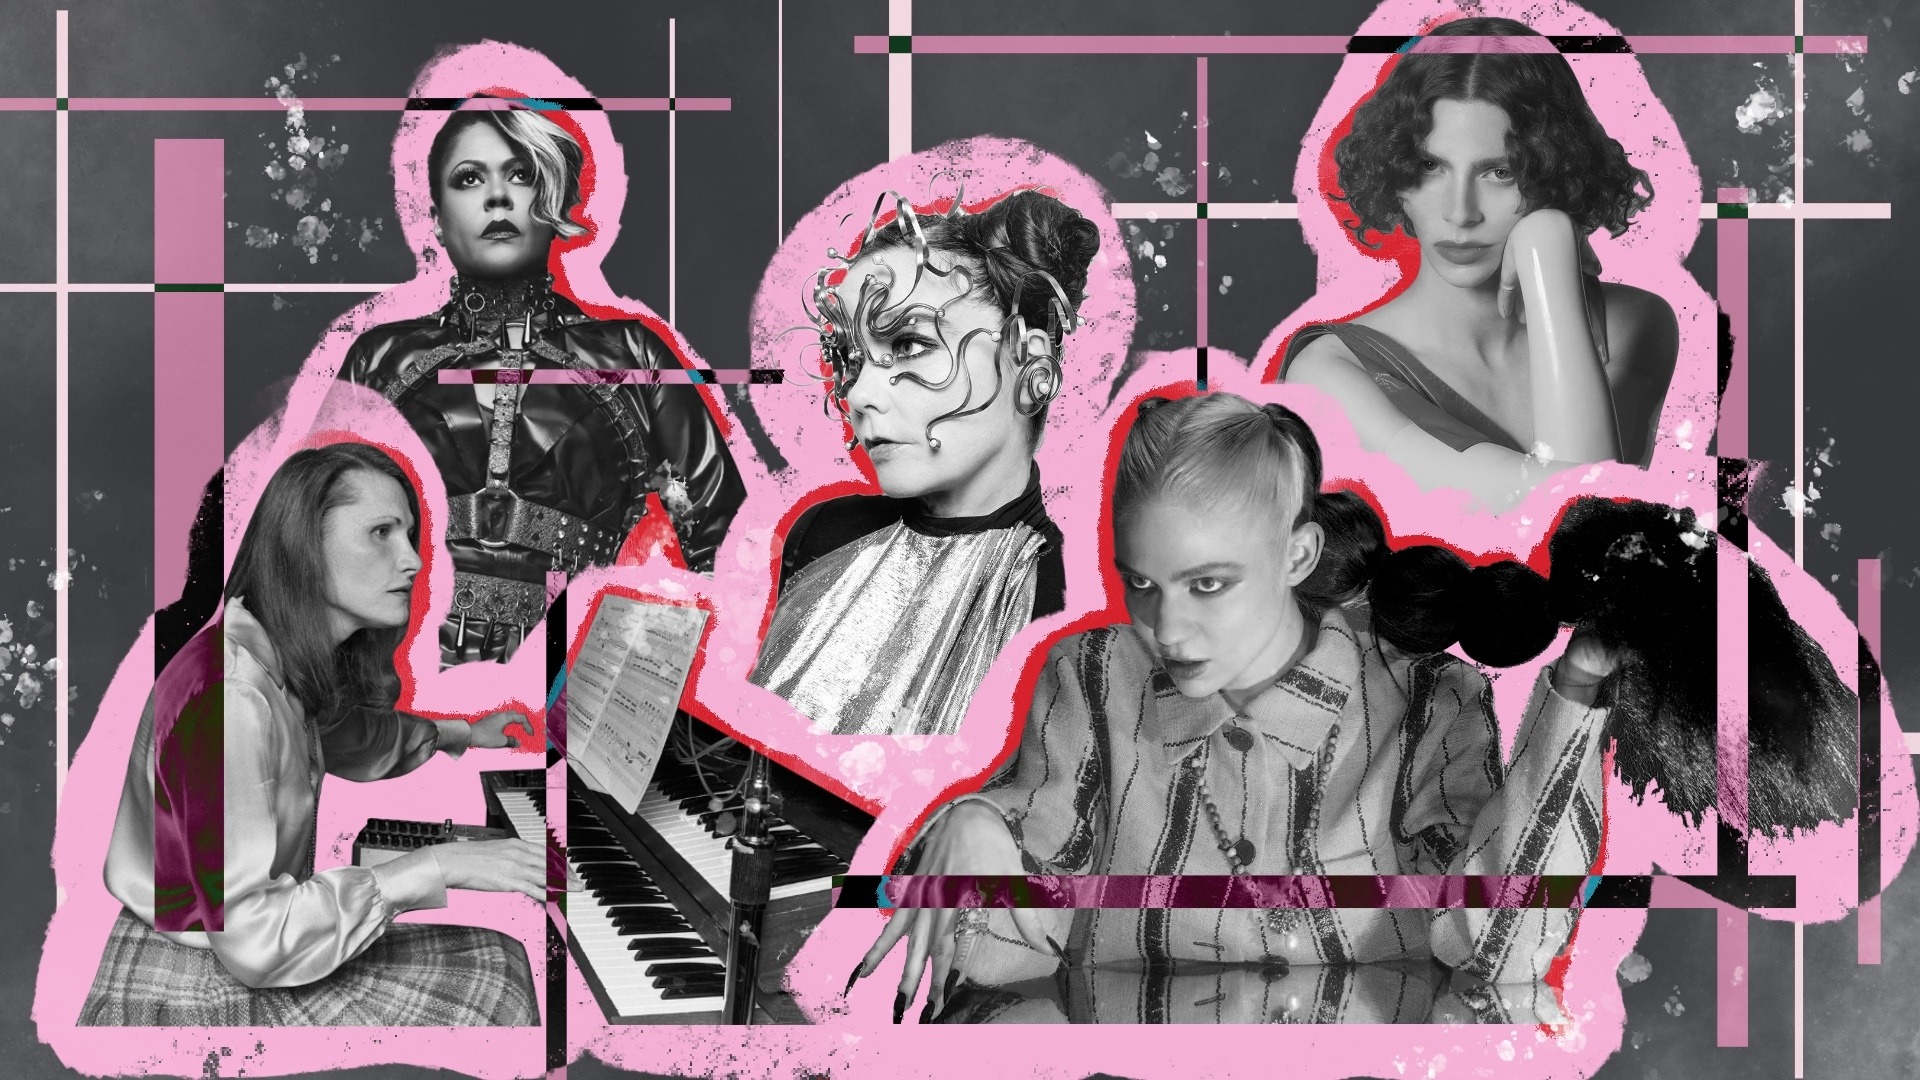 Illustrated image artists and producers Wendy Carlos, Bjork, Grimes, Crystal Waters and SOPHIE in honour of Women's History Month